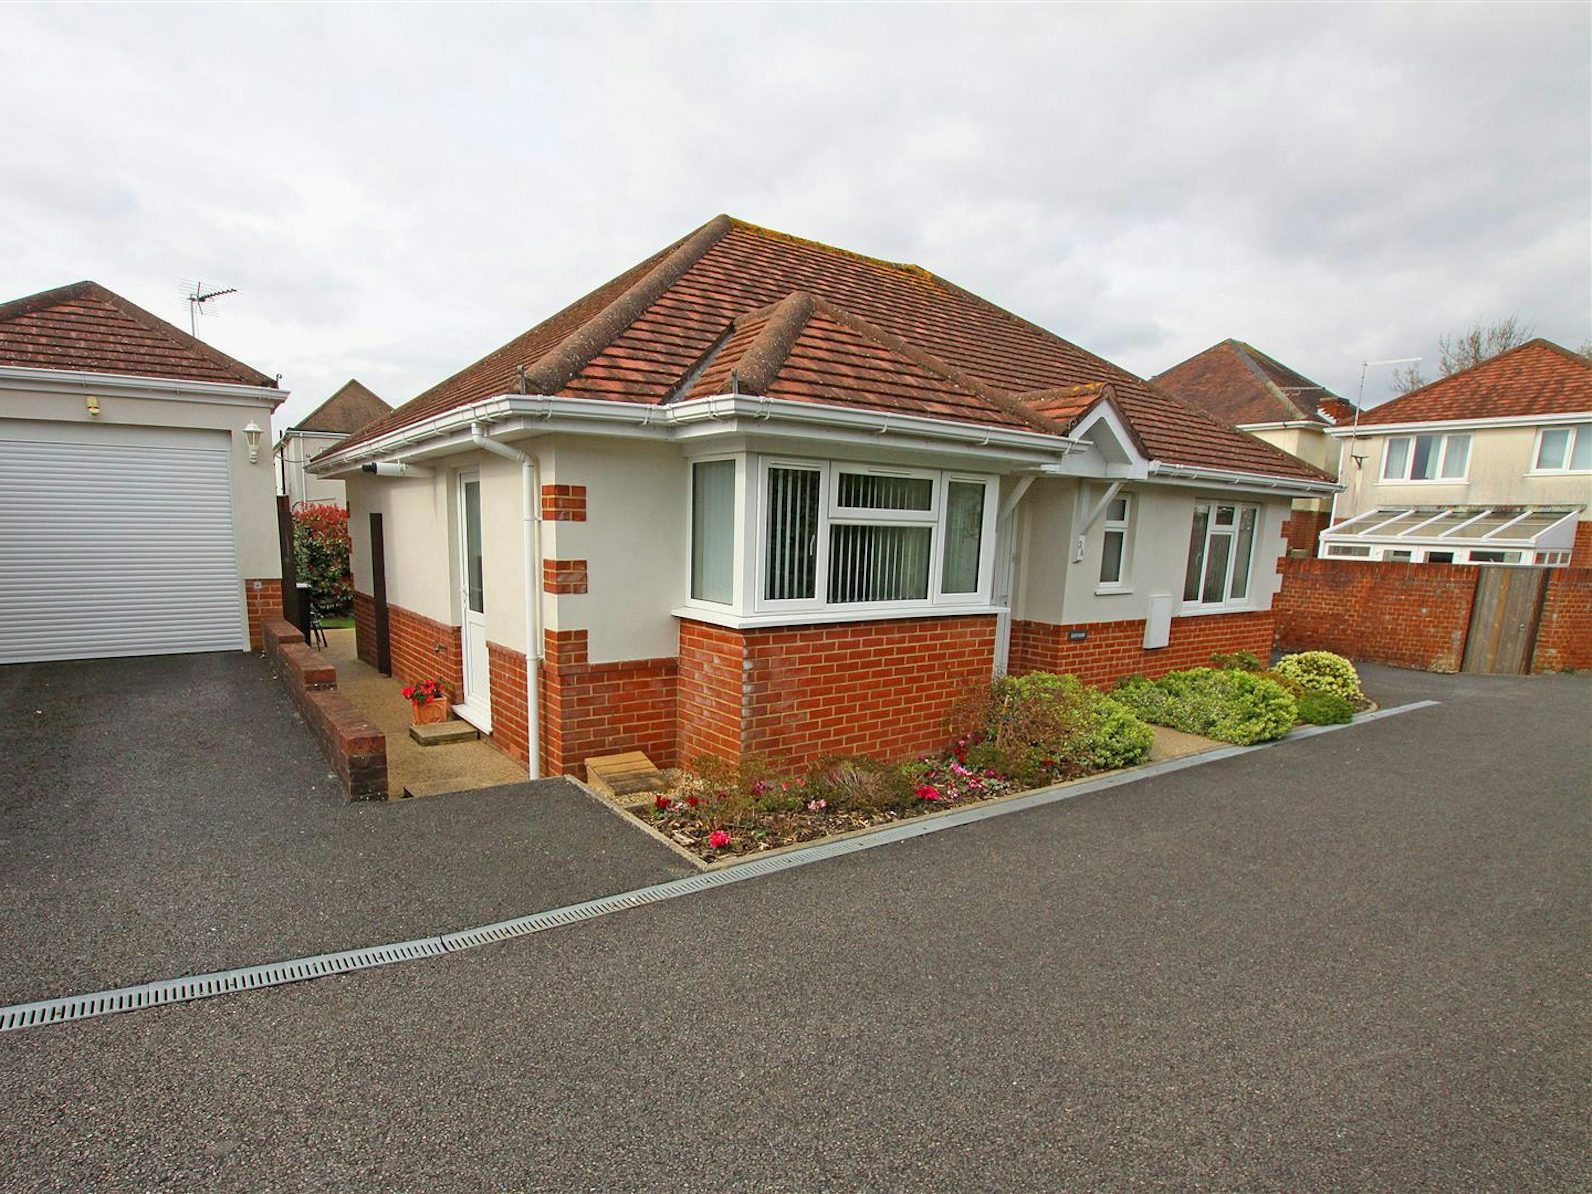 Detached bungalow for sale on Linden Road Moordown, Bournemouth, BH9